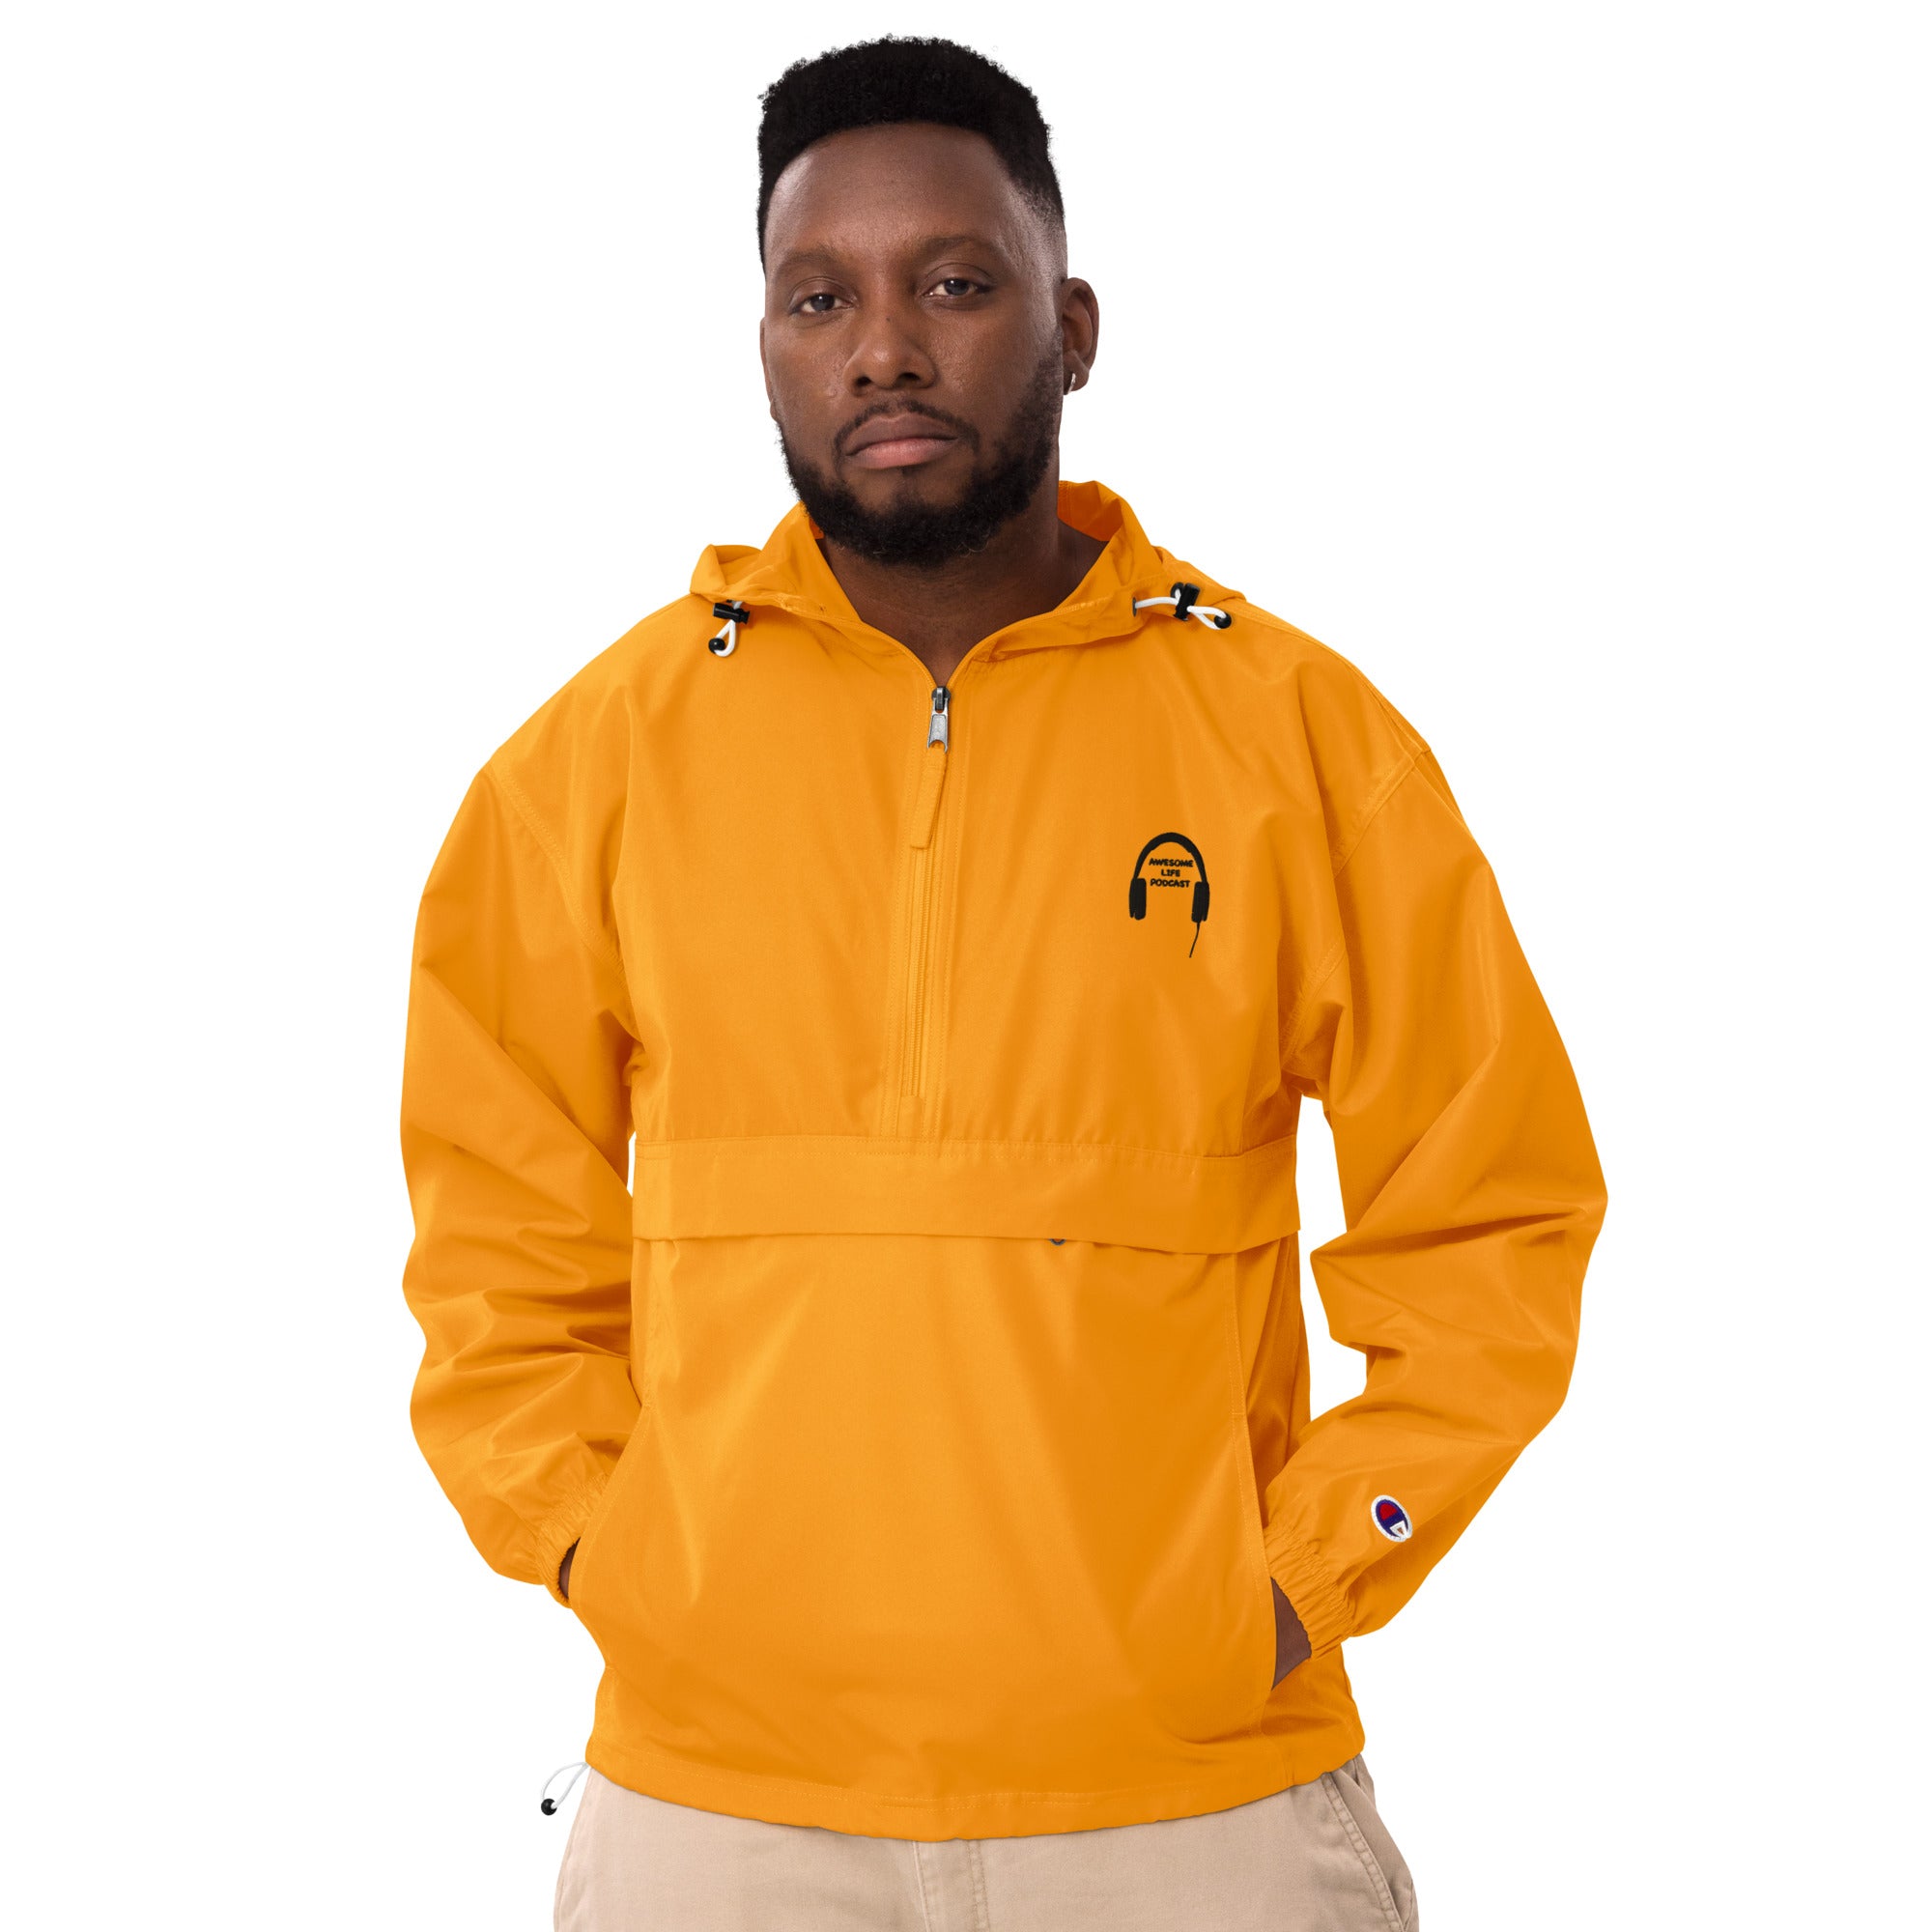 Awesomelife Podcast Embroidered Champion Packable Jacket